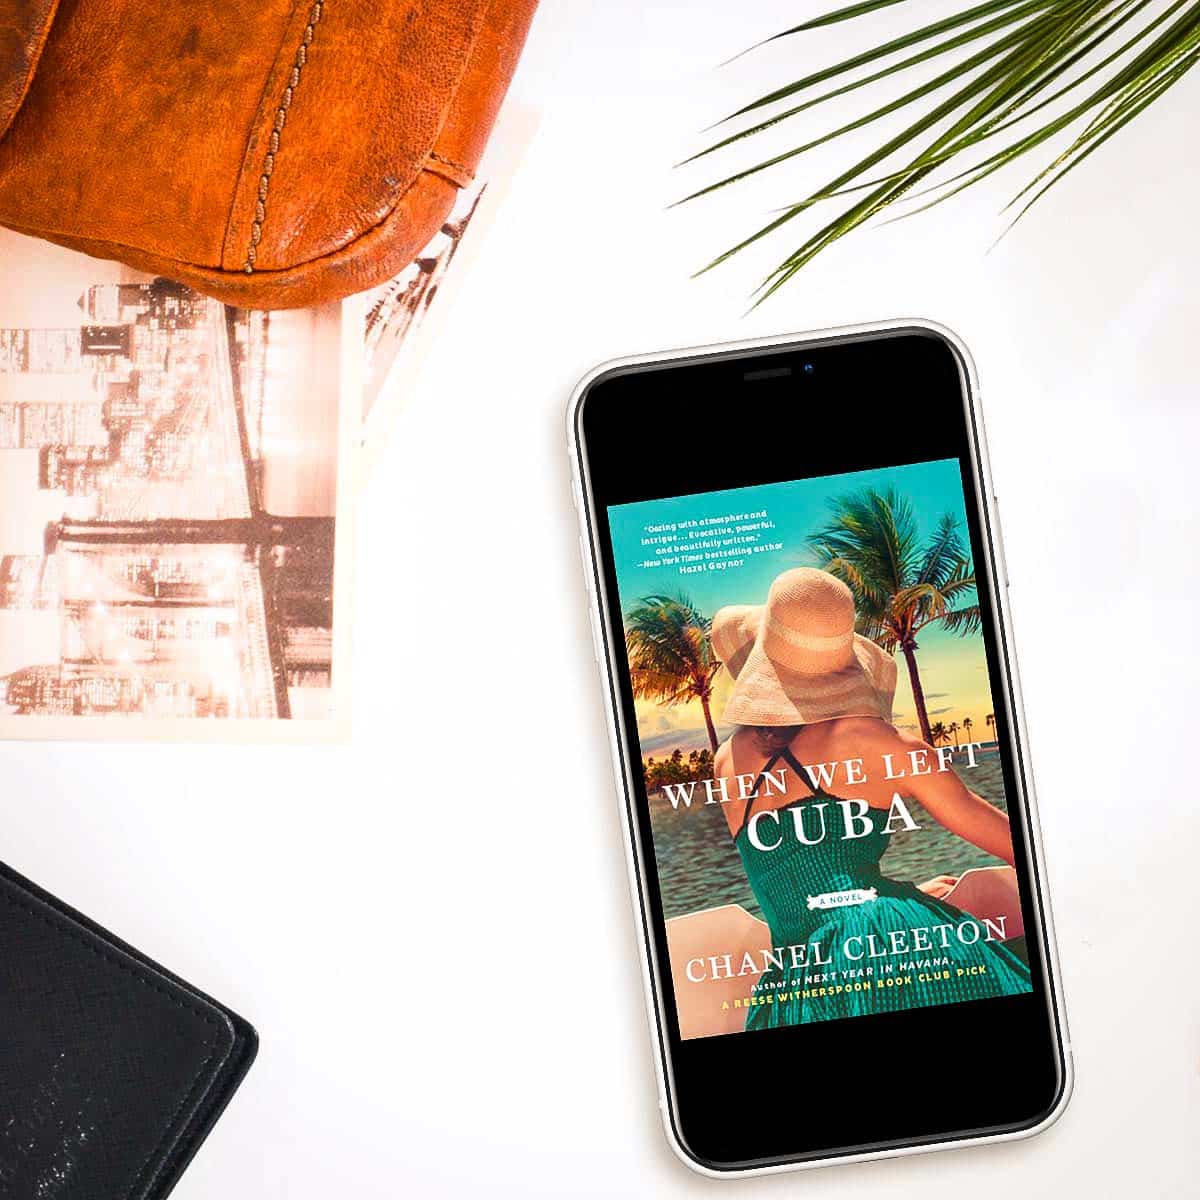 When We Left Cuba by Chanel Cleeton is a historical romance set in the 1960's that's full of glamour, intrigue, and suspense! This striking story about a woman who makes it her mission to avenge her brother’s death and bring down the man responsible is riveting from beginning to end.